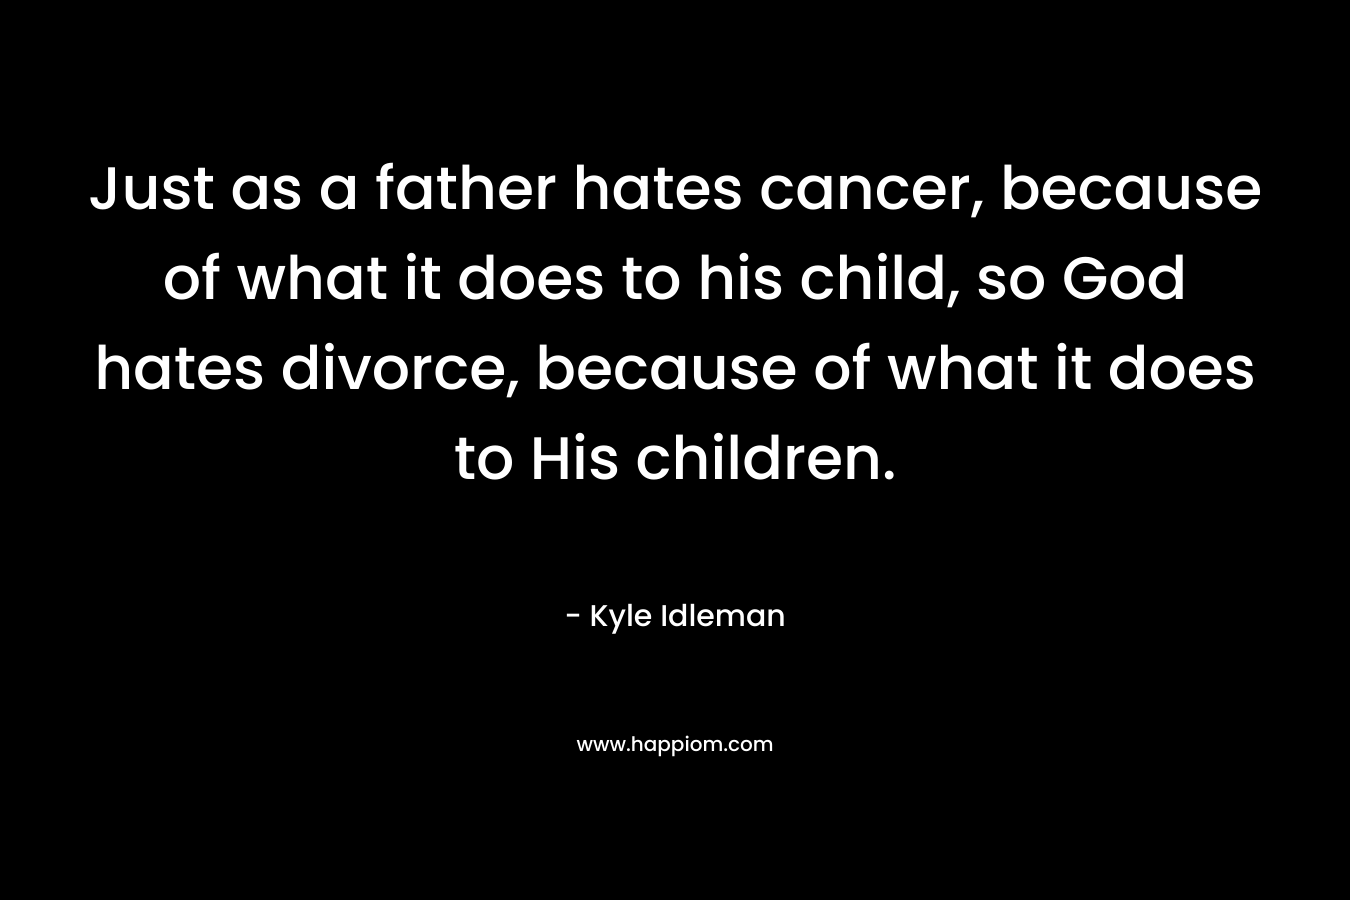 Just as a father hates cancer, because of what it does to his child, so God hates divorce, because of what it does to His children.